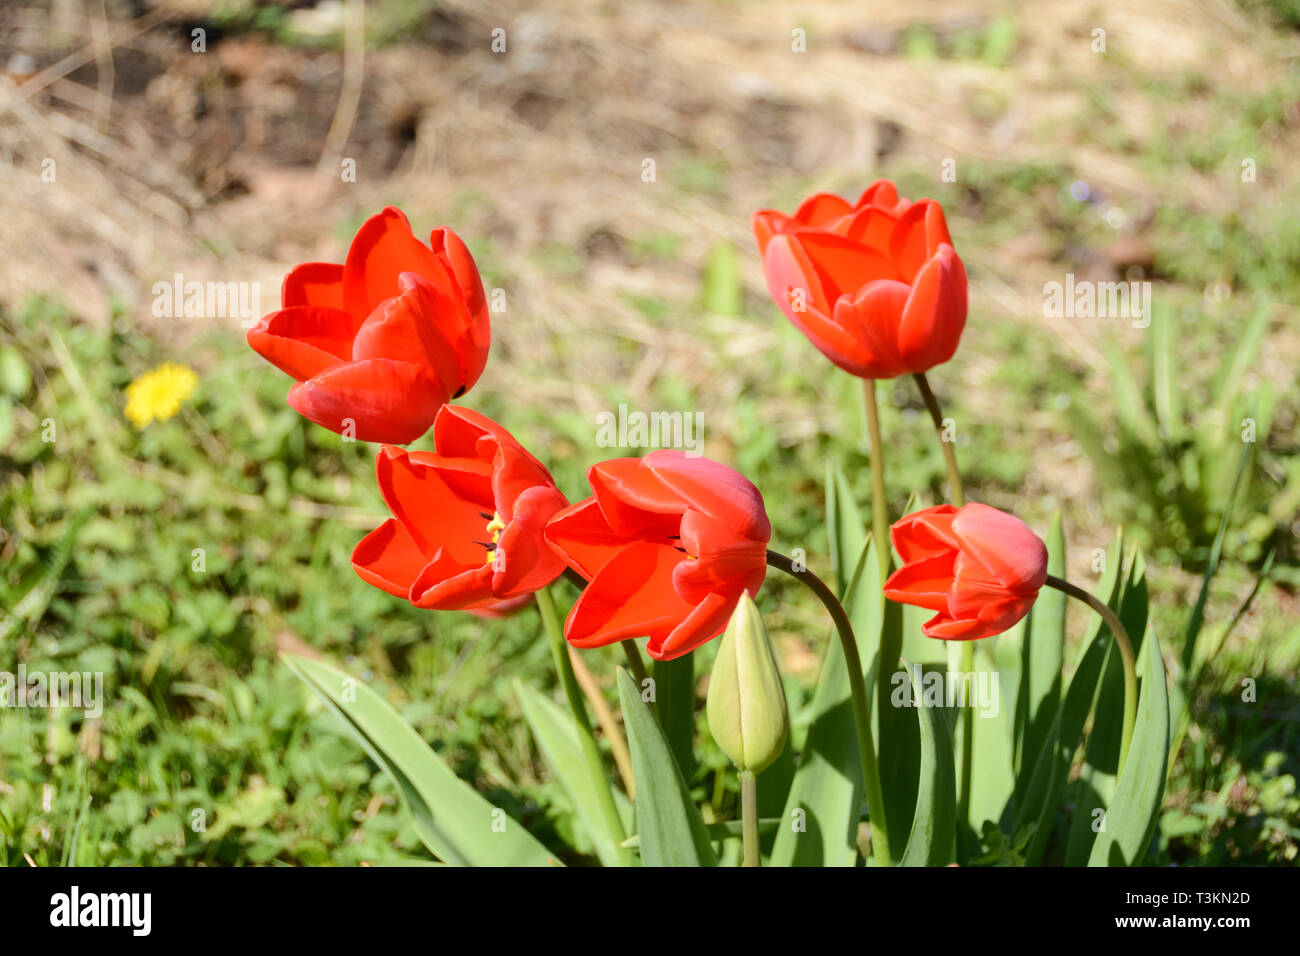 Brightly coloured red tulips on a spring day Stock Photo